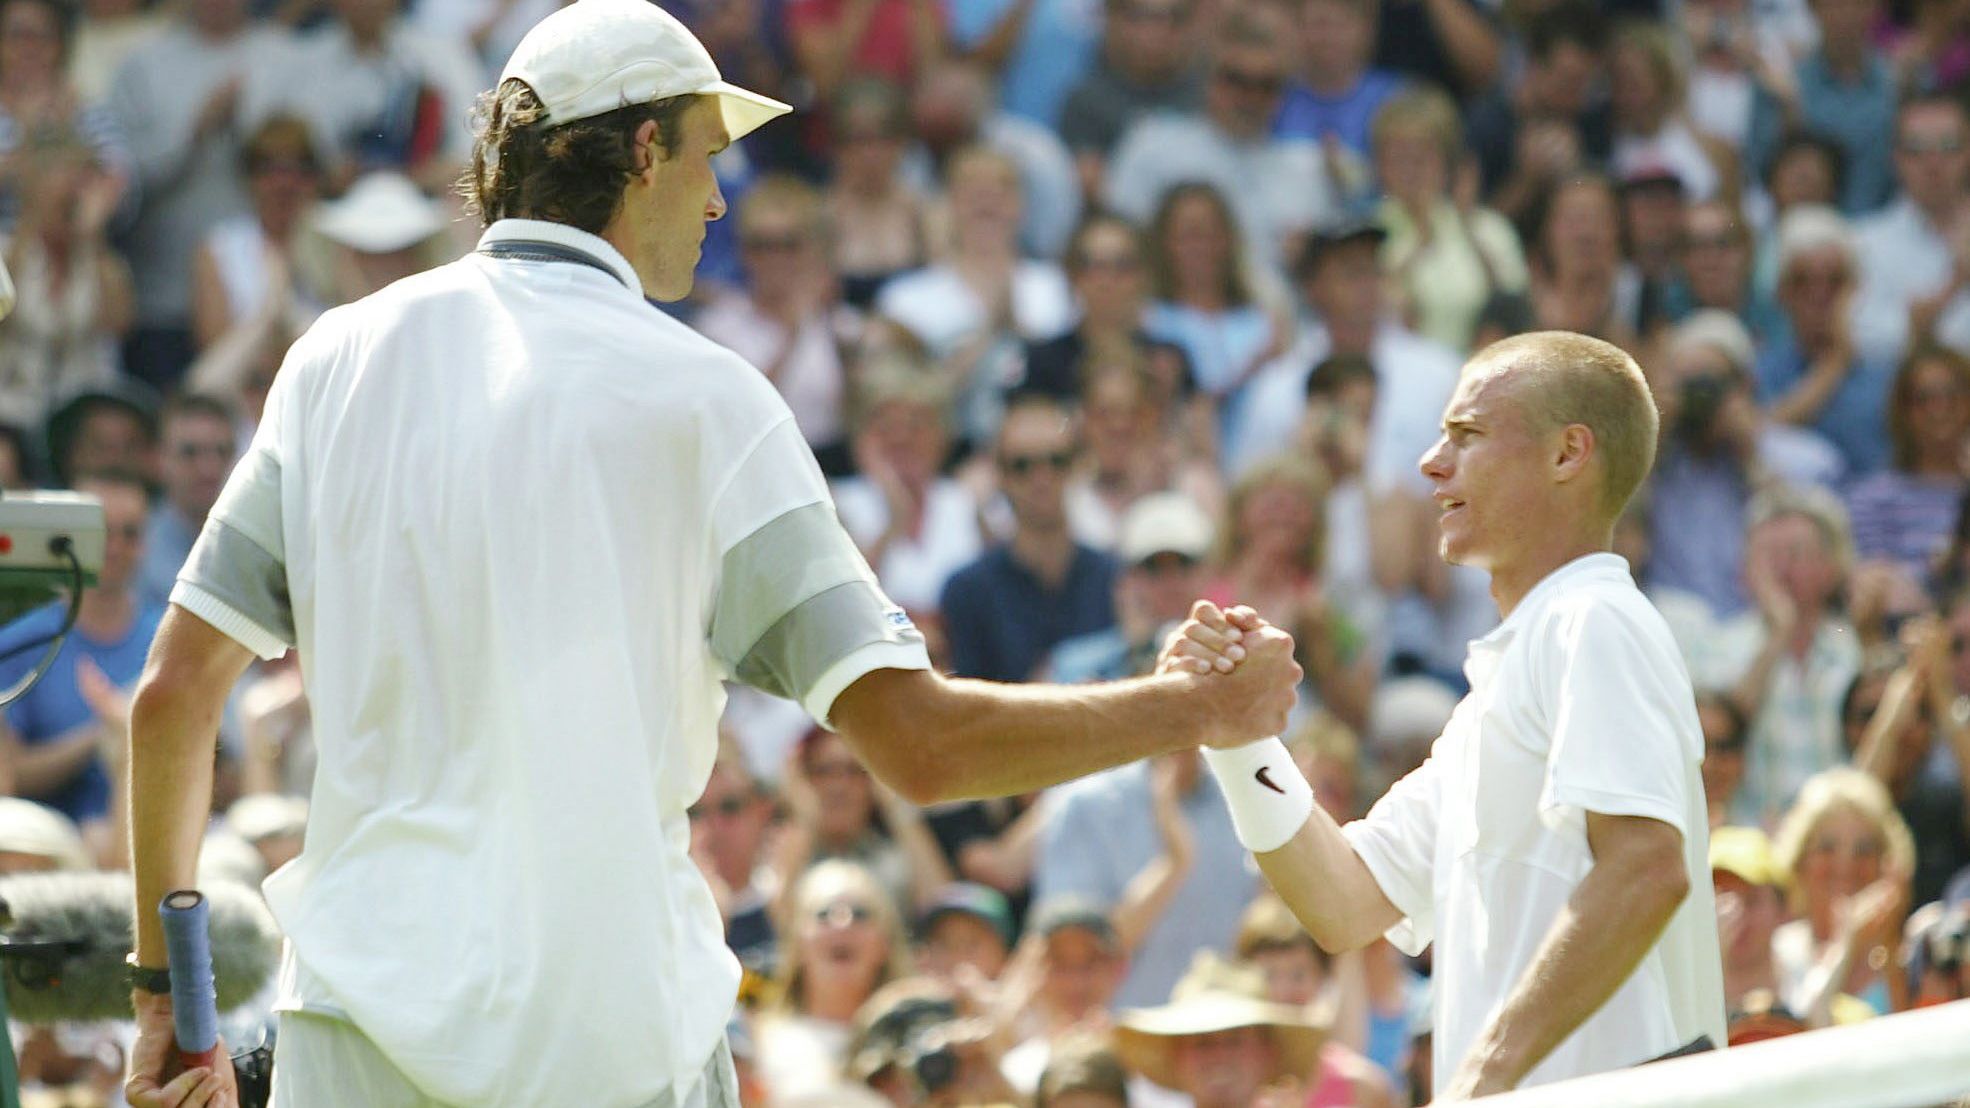 Towering tennis giant who stunned Lleyton Hewitt at Wimbledon retires 21 years later